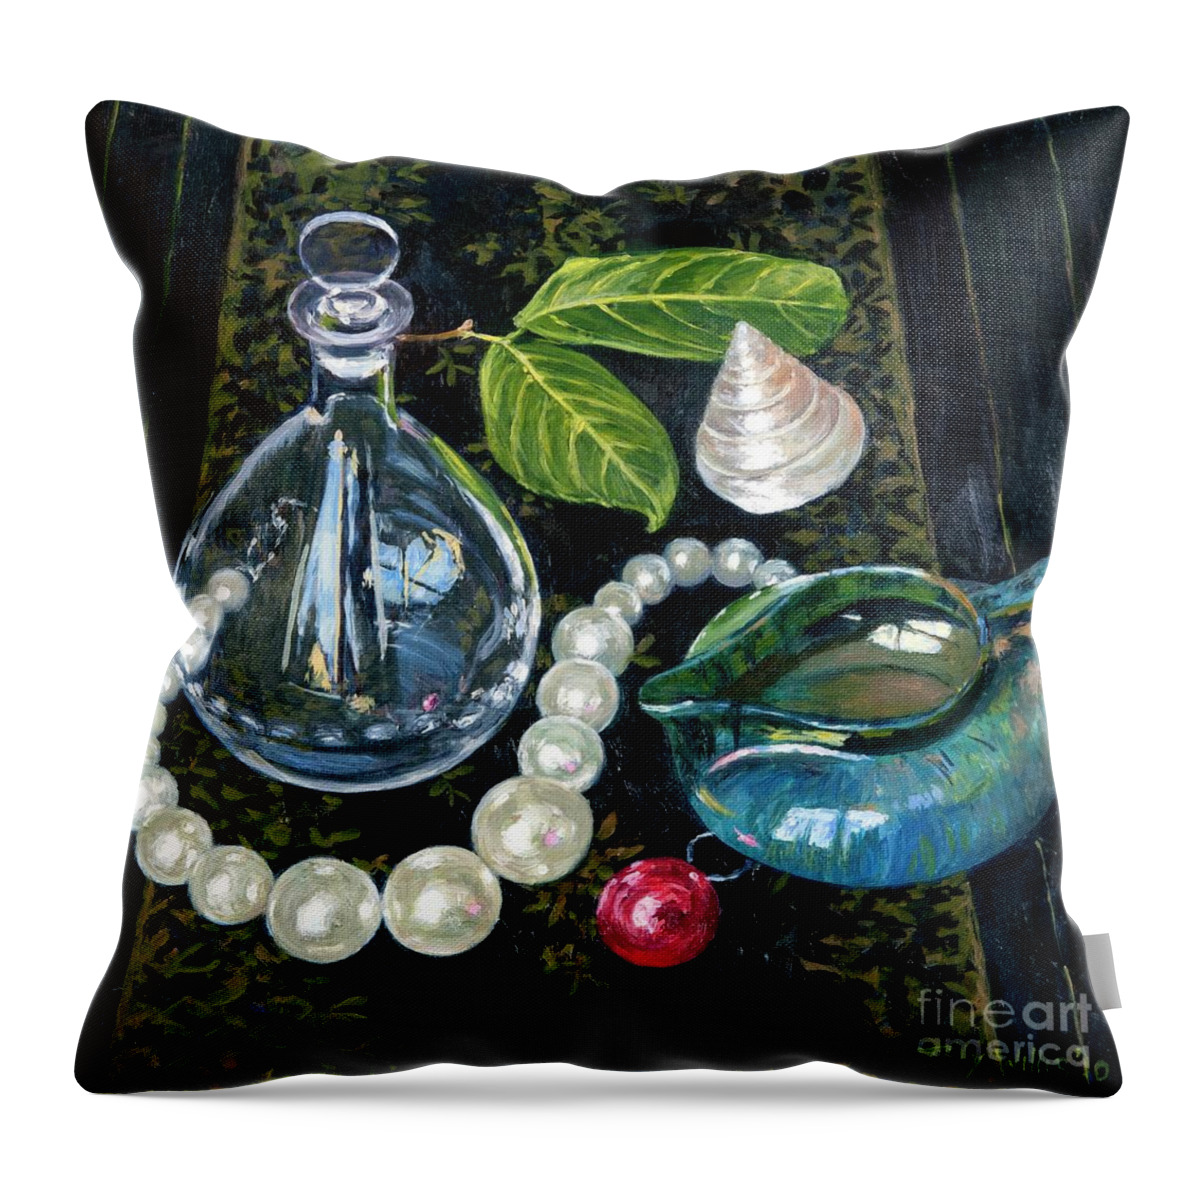 Contemporary Art Throw Pillow featuring the painting Still Life With Pearls by Tilly Willis